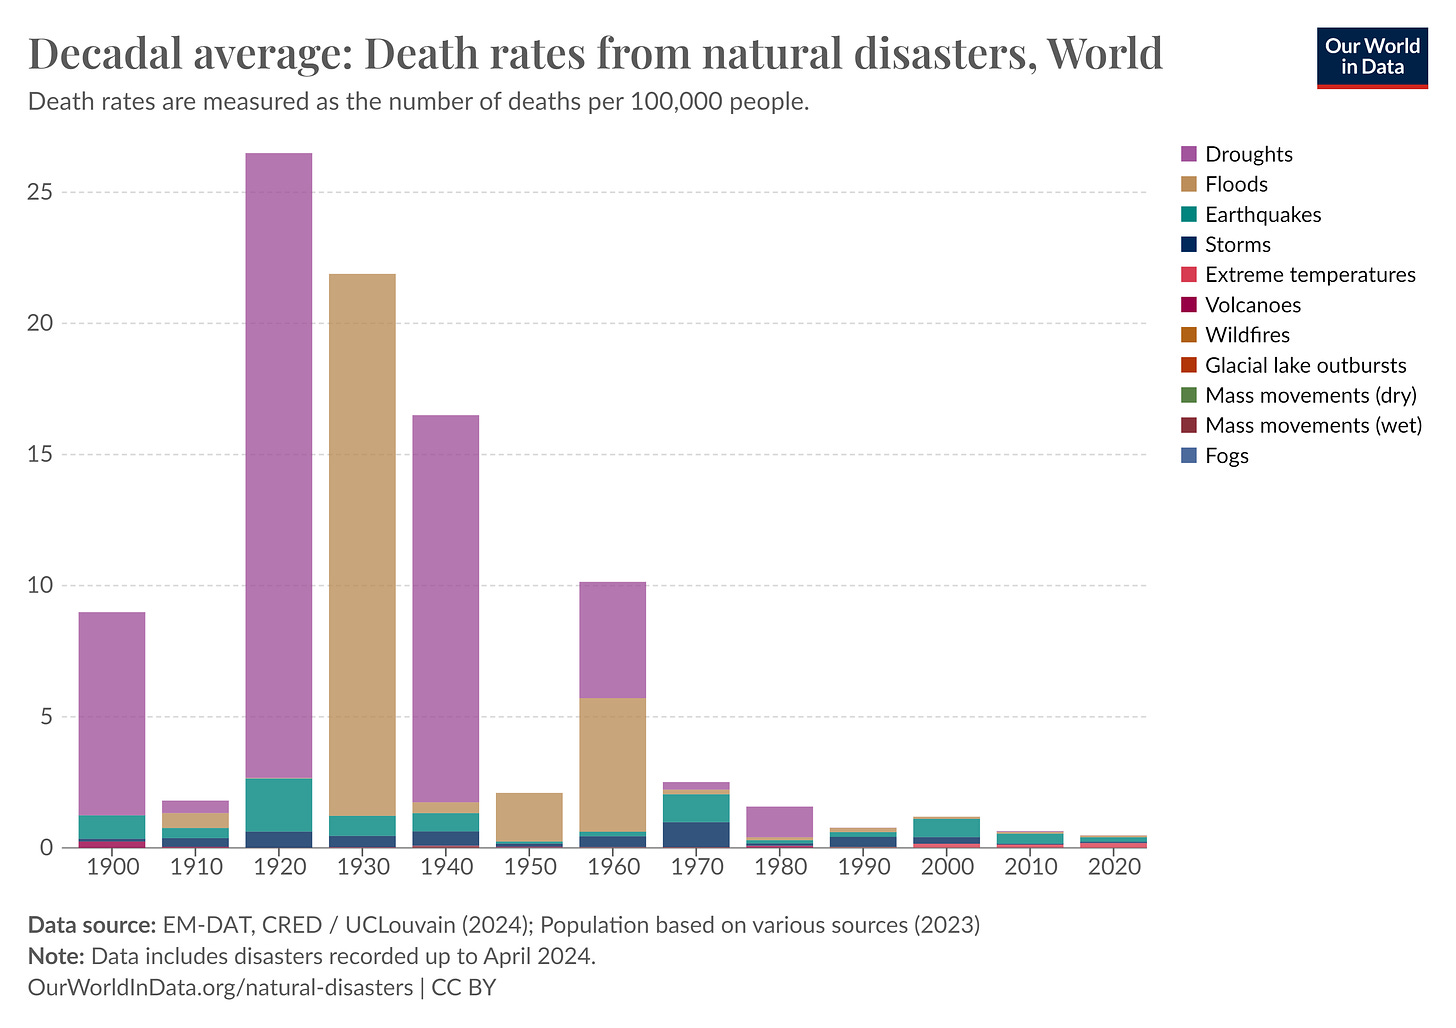 Figure 3 - Decadal Average Death Rates from Natural Disasters (source Our World in Data)